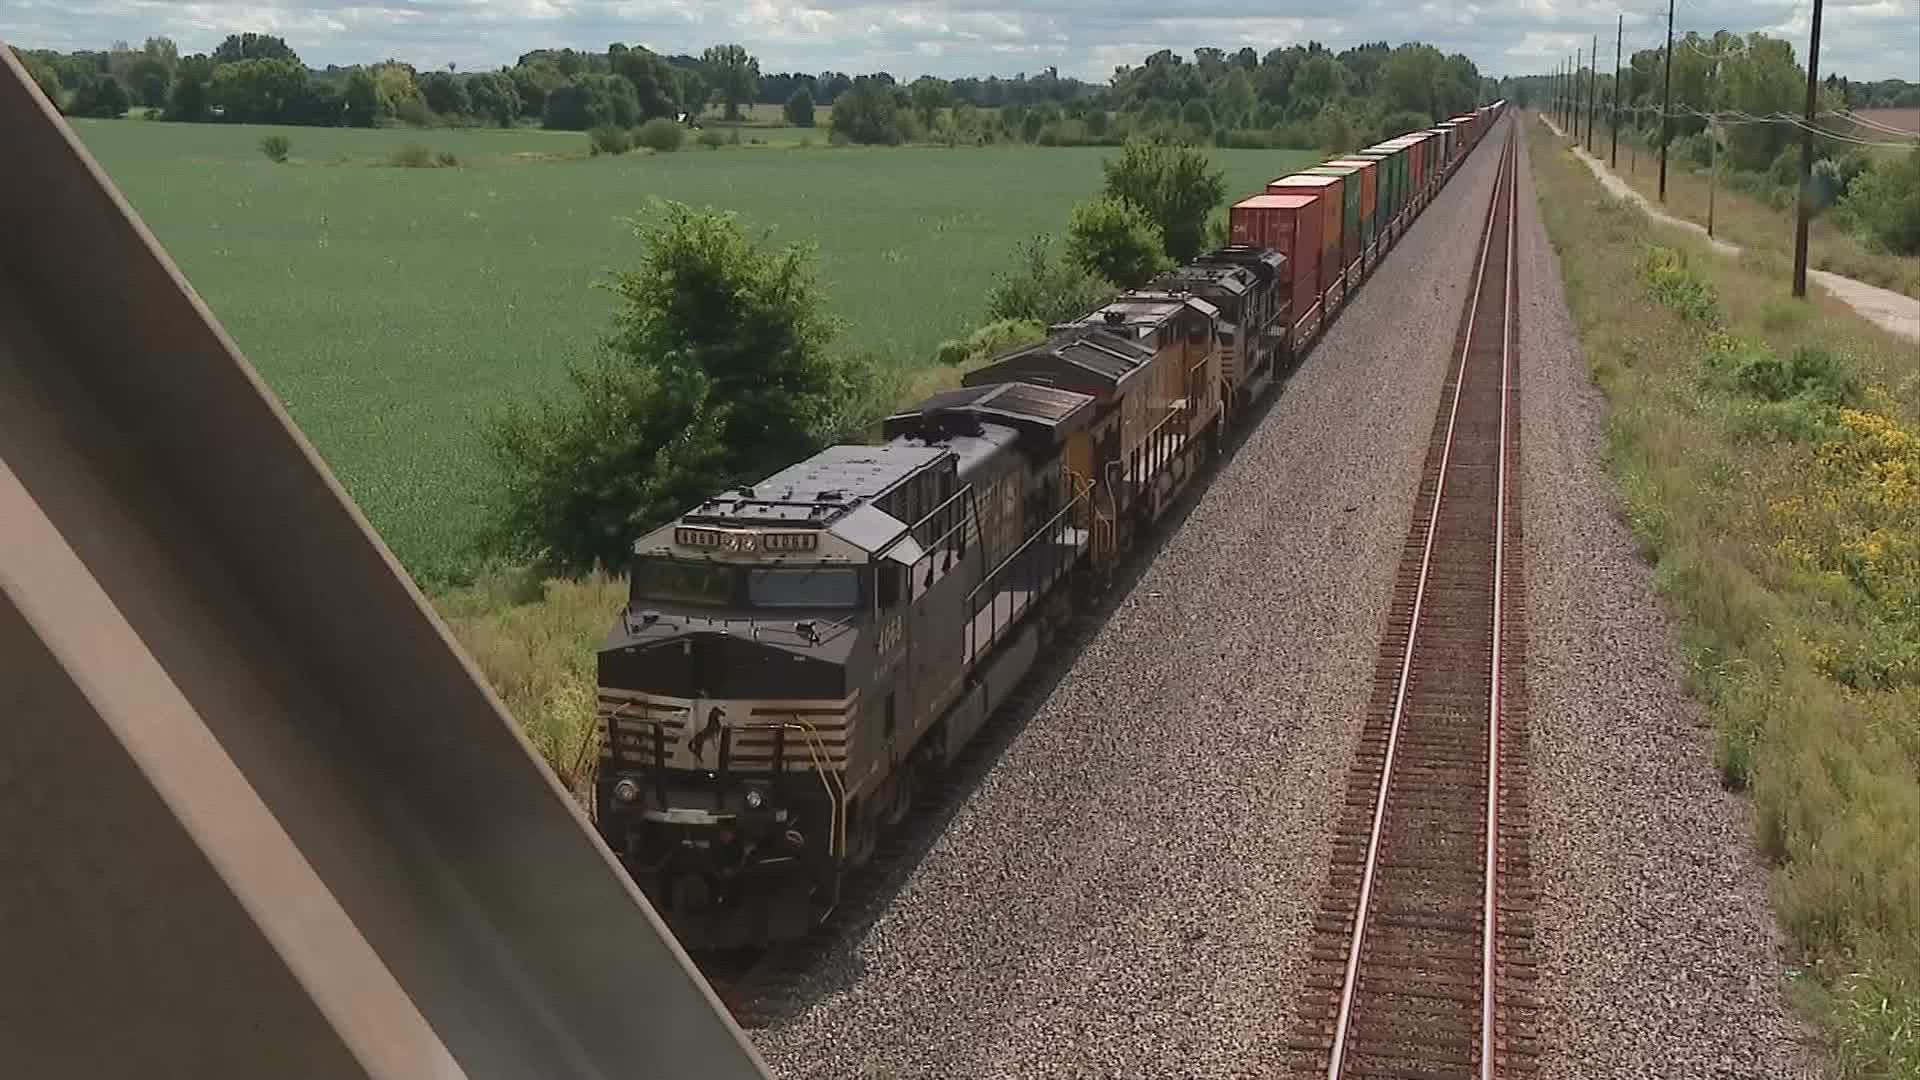 The potential railroad strike could have a devastating effect on consumers nationwide, but especially here in Ohio.